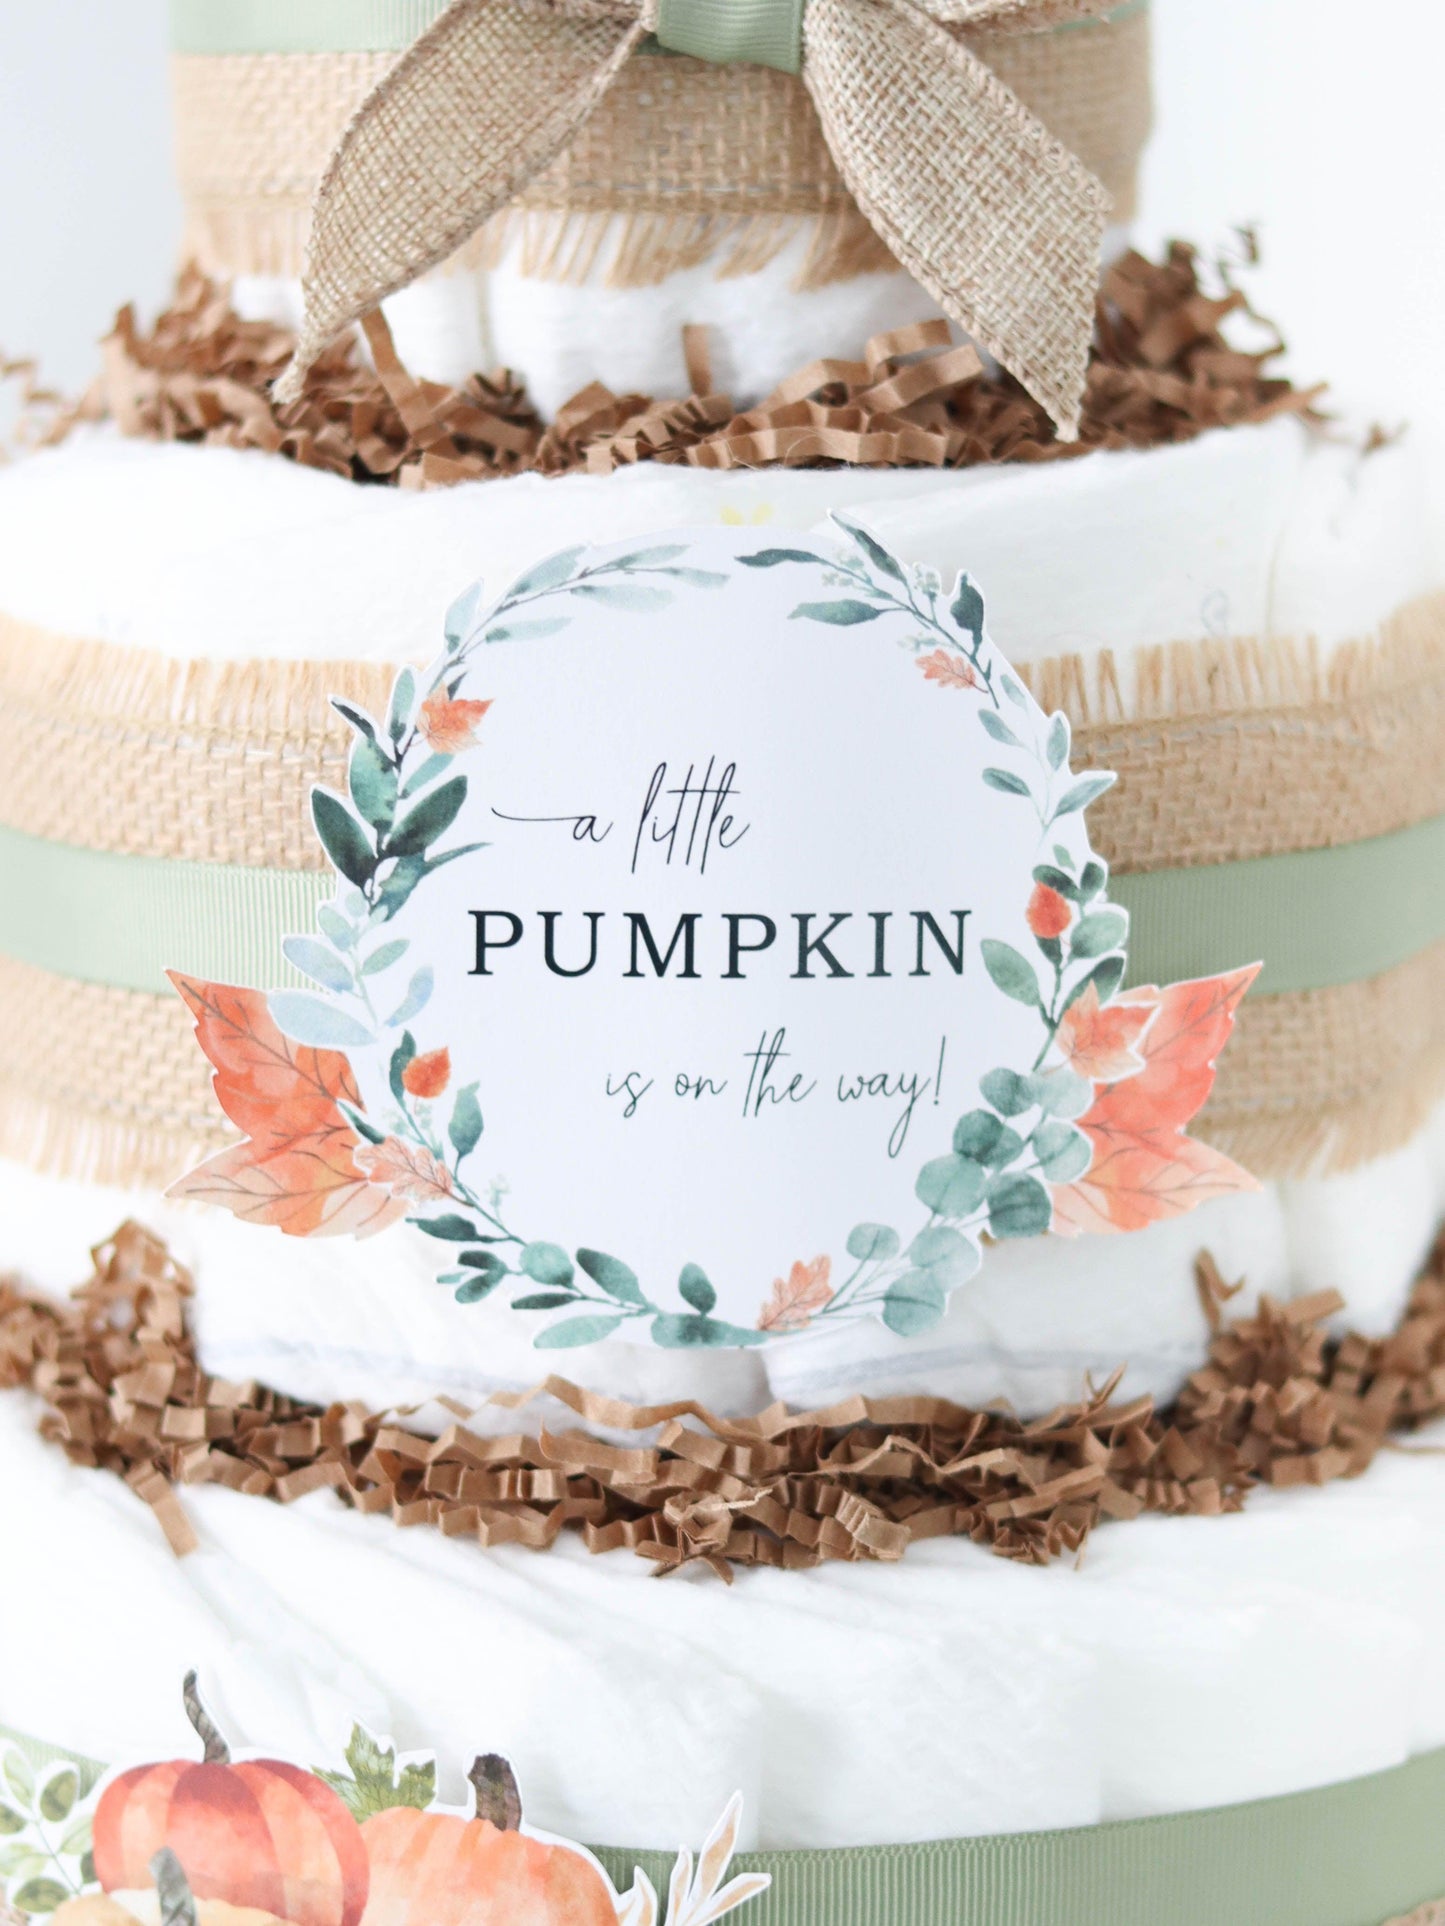 a little pumpkin is on the way diaper cake sign